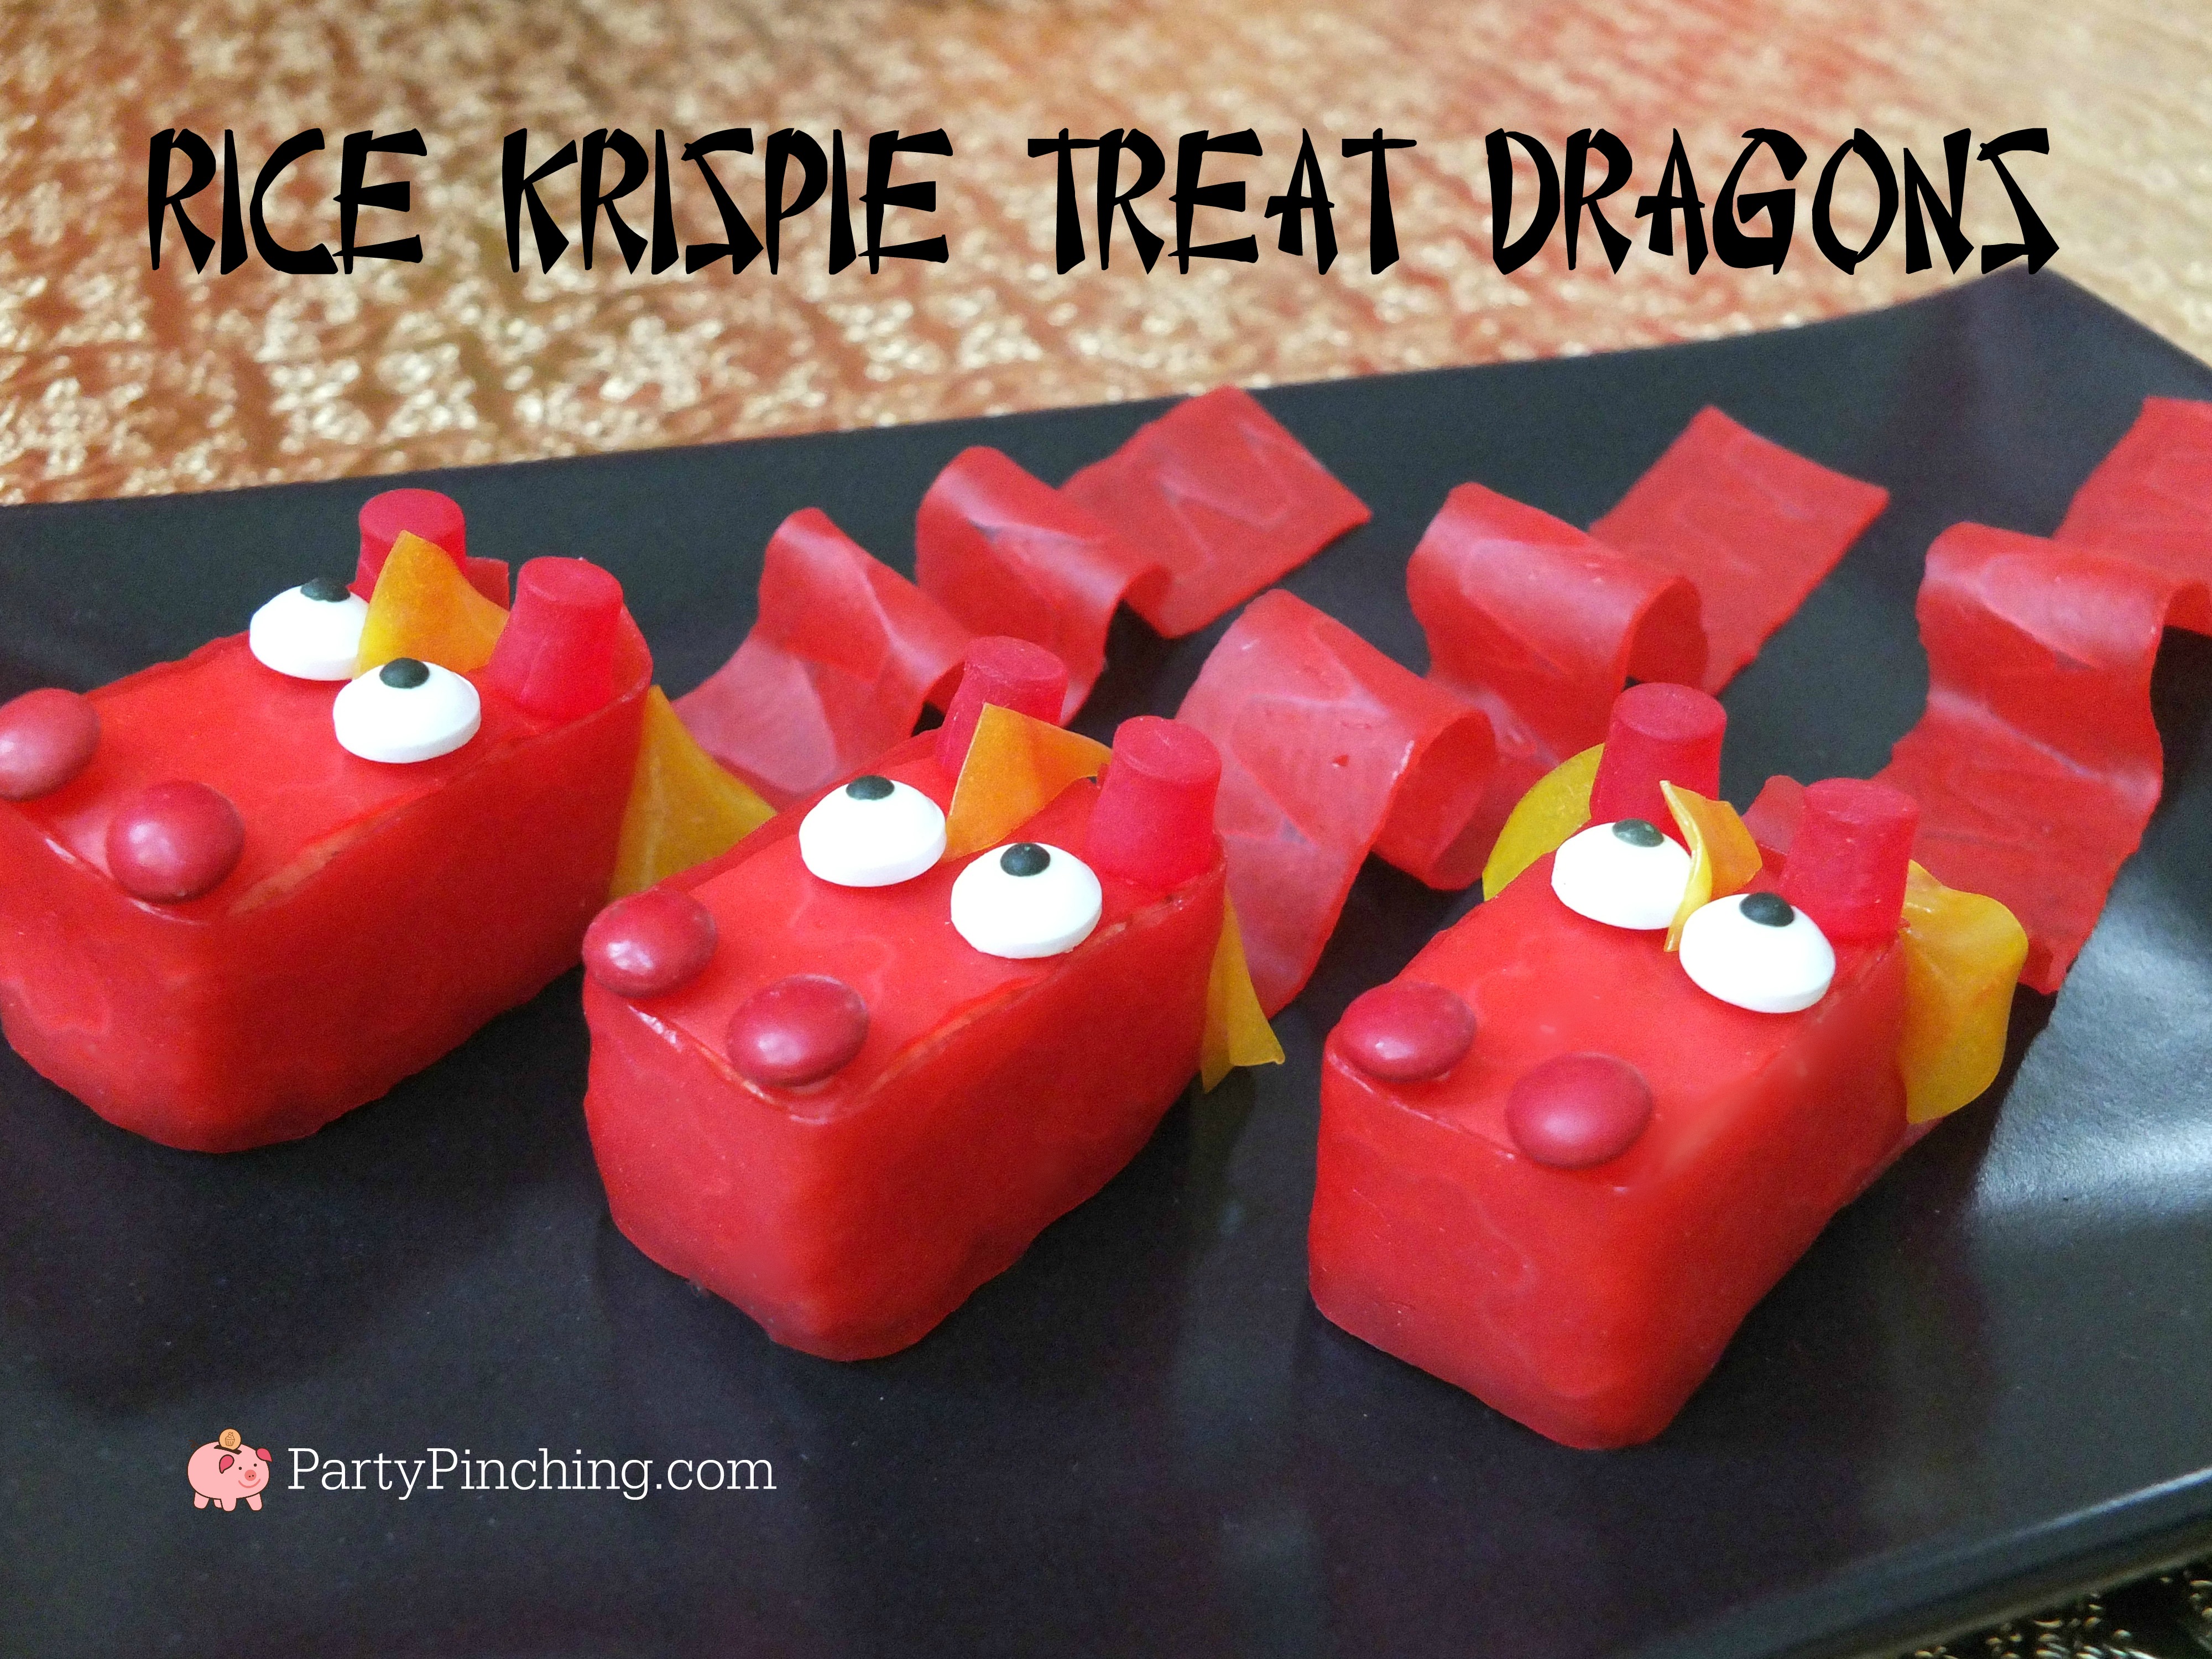 Chinese New year treat ideas, Chinese New Year Lunar new year dragon, Dragon Rice Krispie Treats, Chinese New year dessert ideas, cute food, fun food for kids, sweet treats